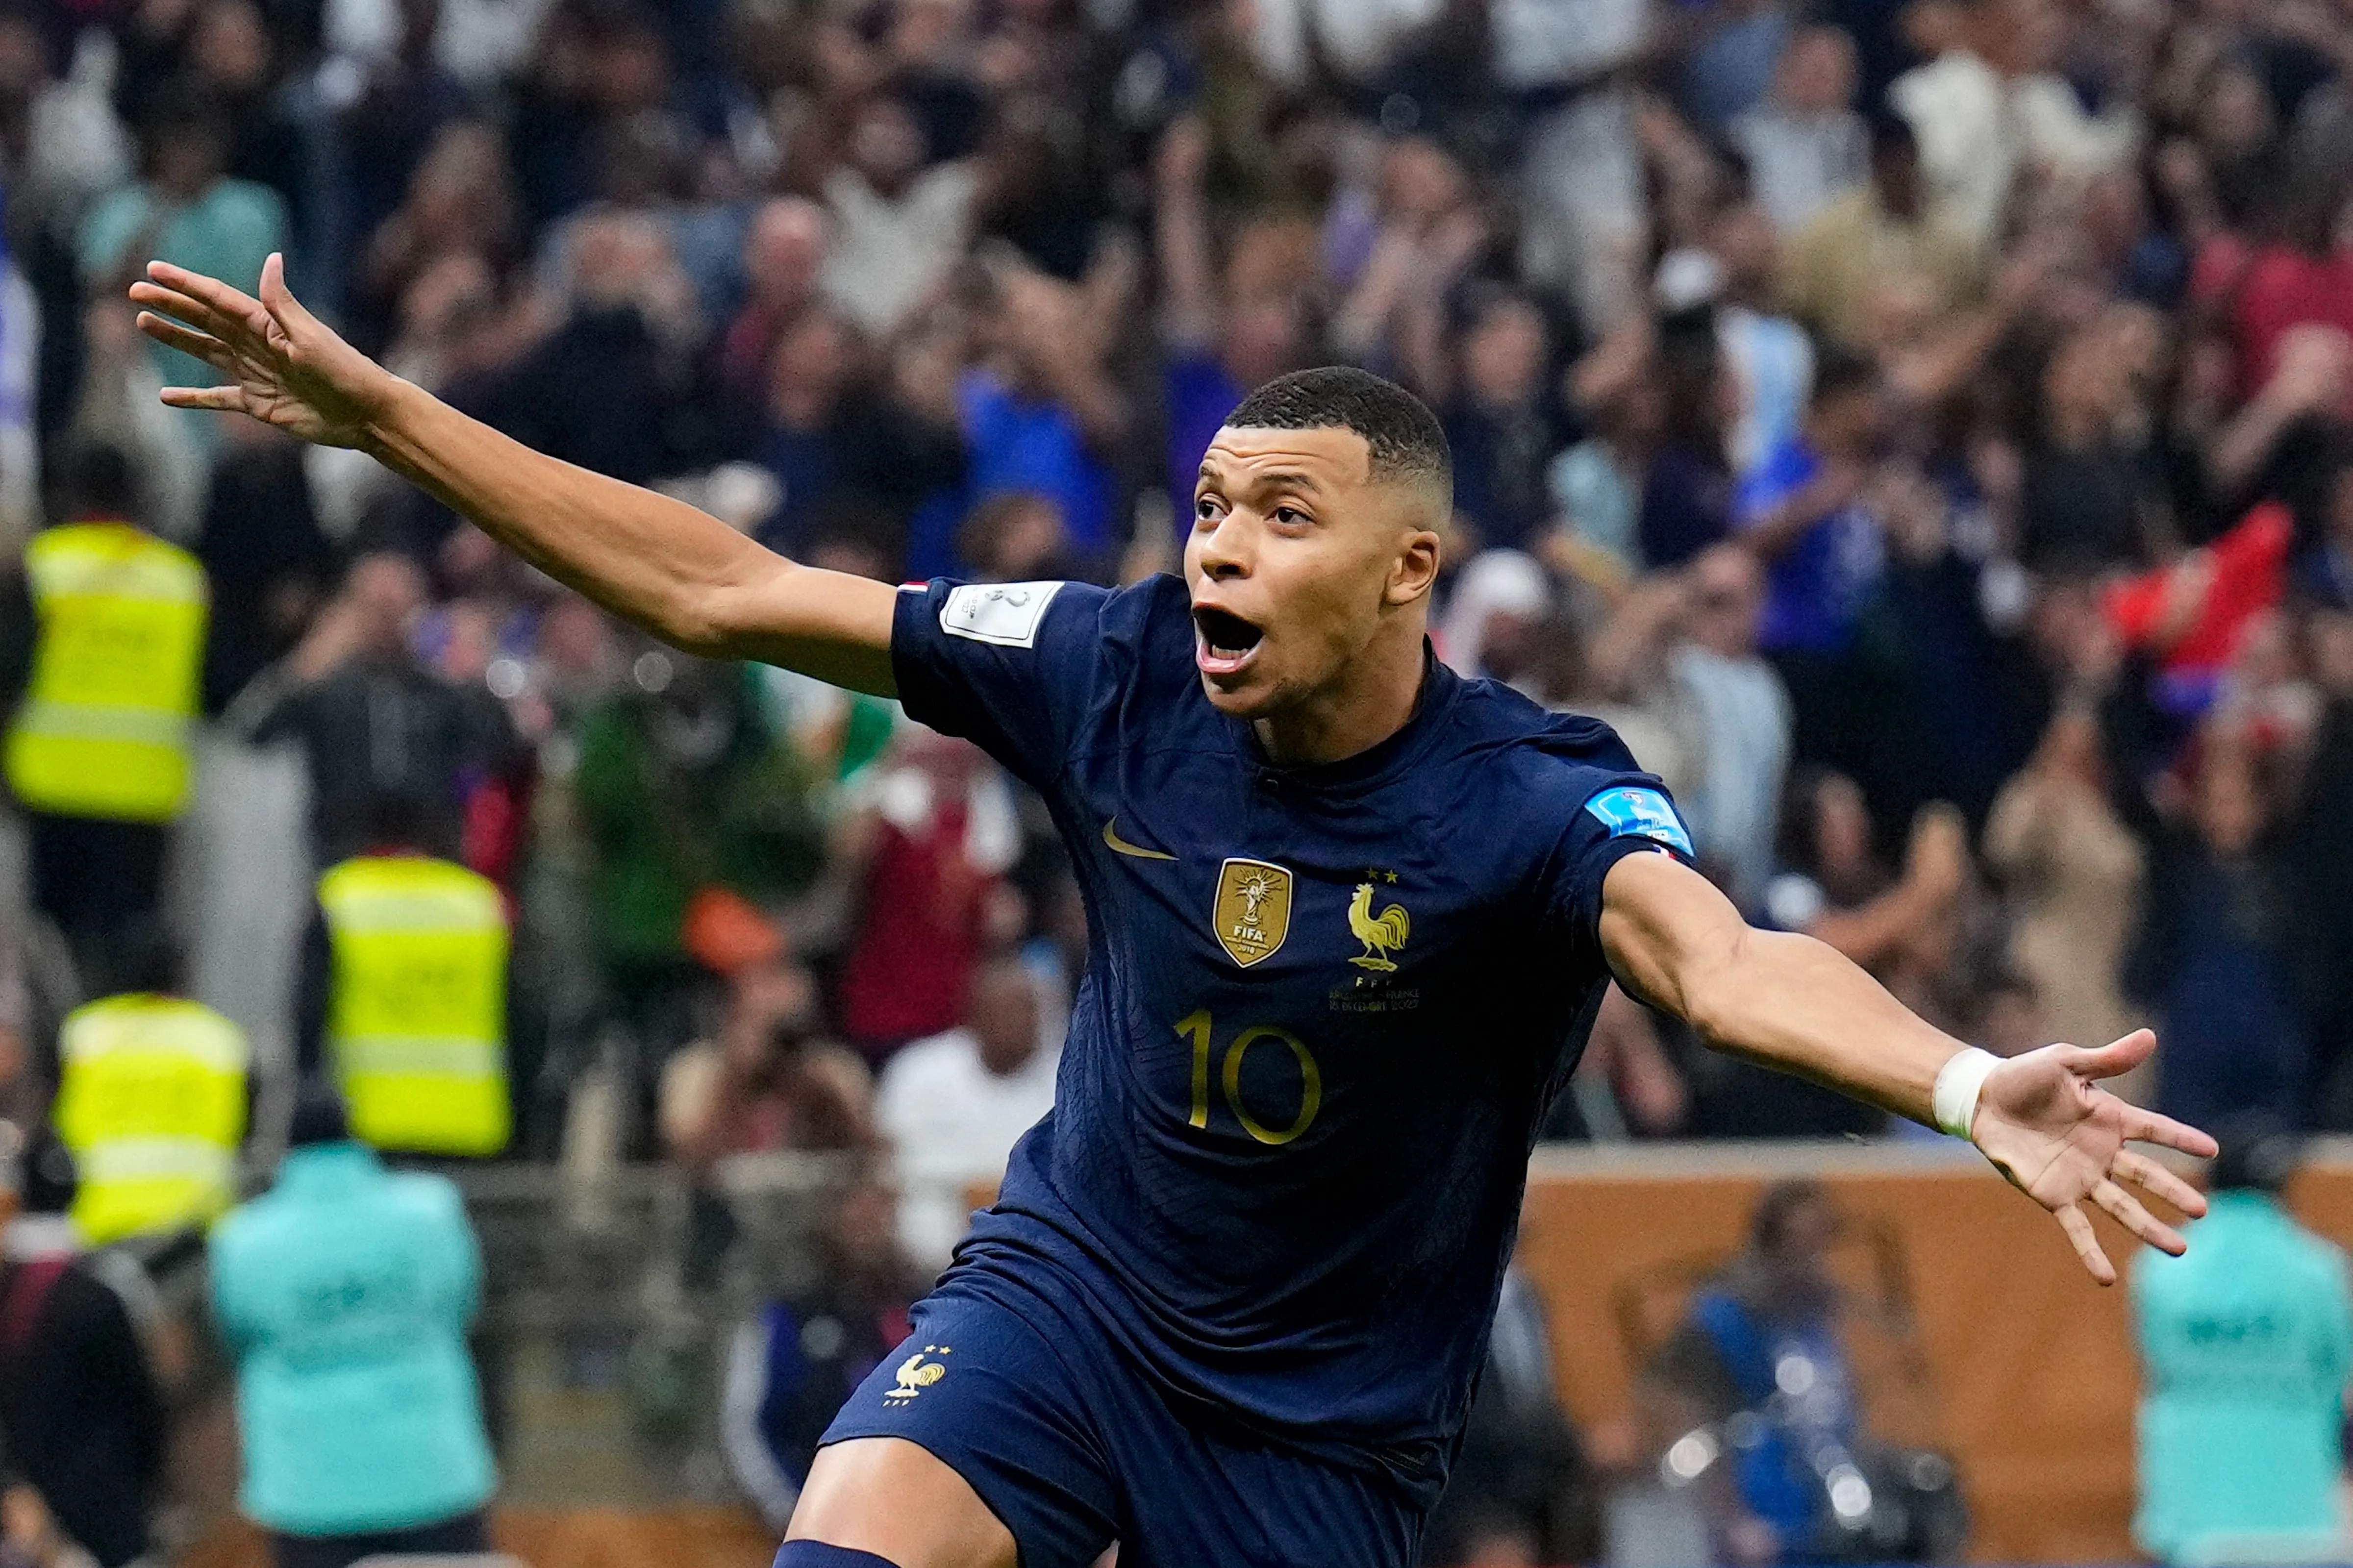 France’s Kylian Mbappe second player to score a hattrick in World Cup